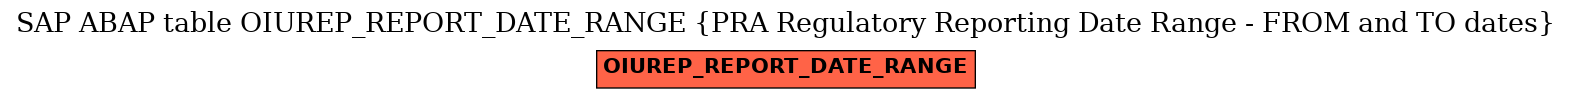 E-R Diagram for table OIUREP_REPORT_DATE_RANGE (PRA Regulatory Reporting Date Range - FROM and TO dates)